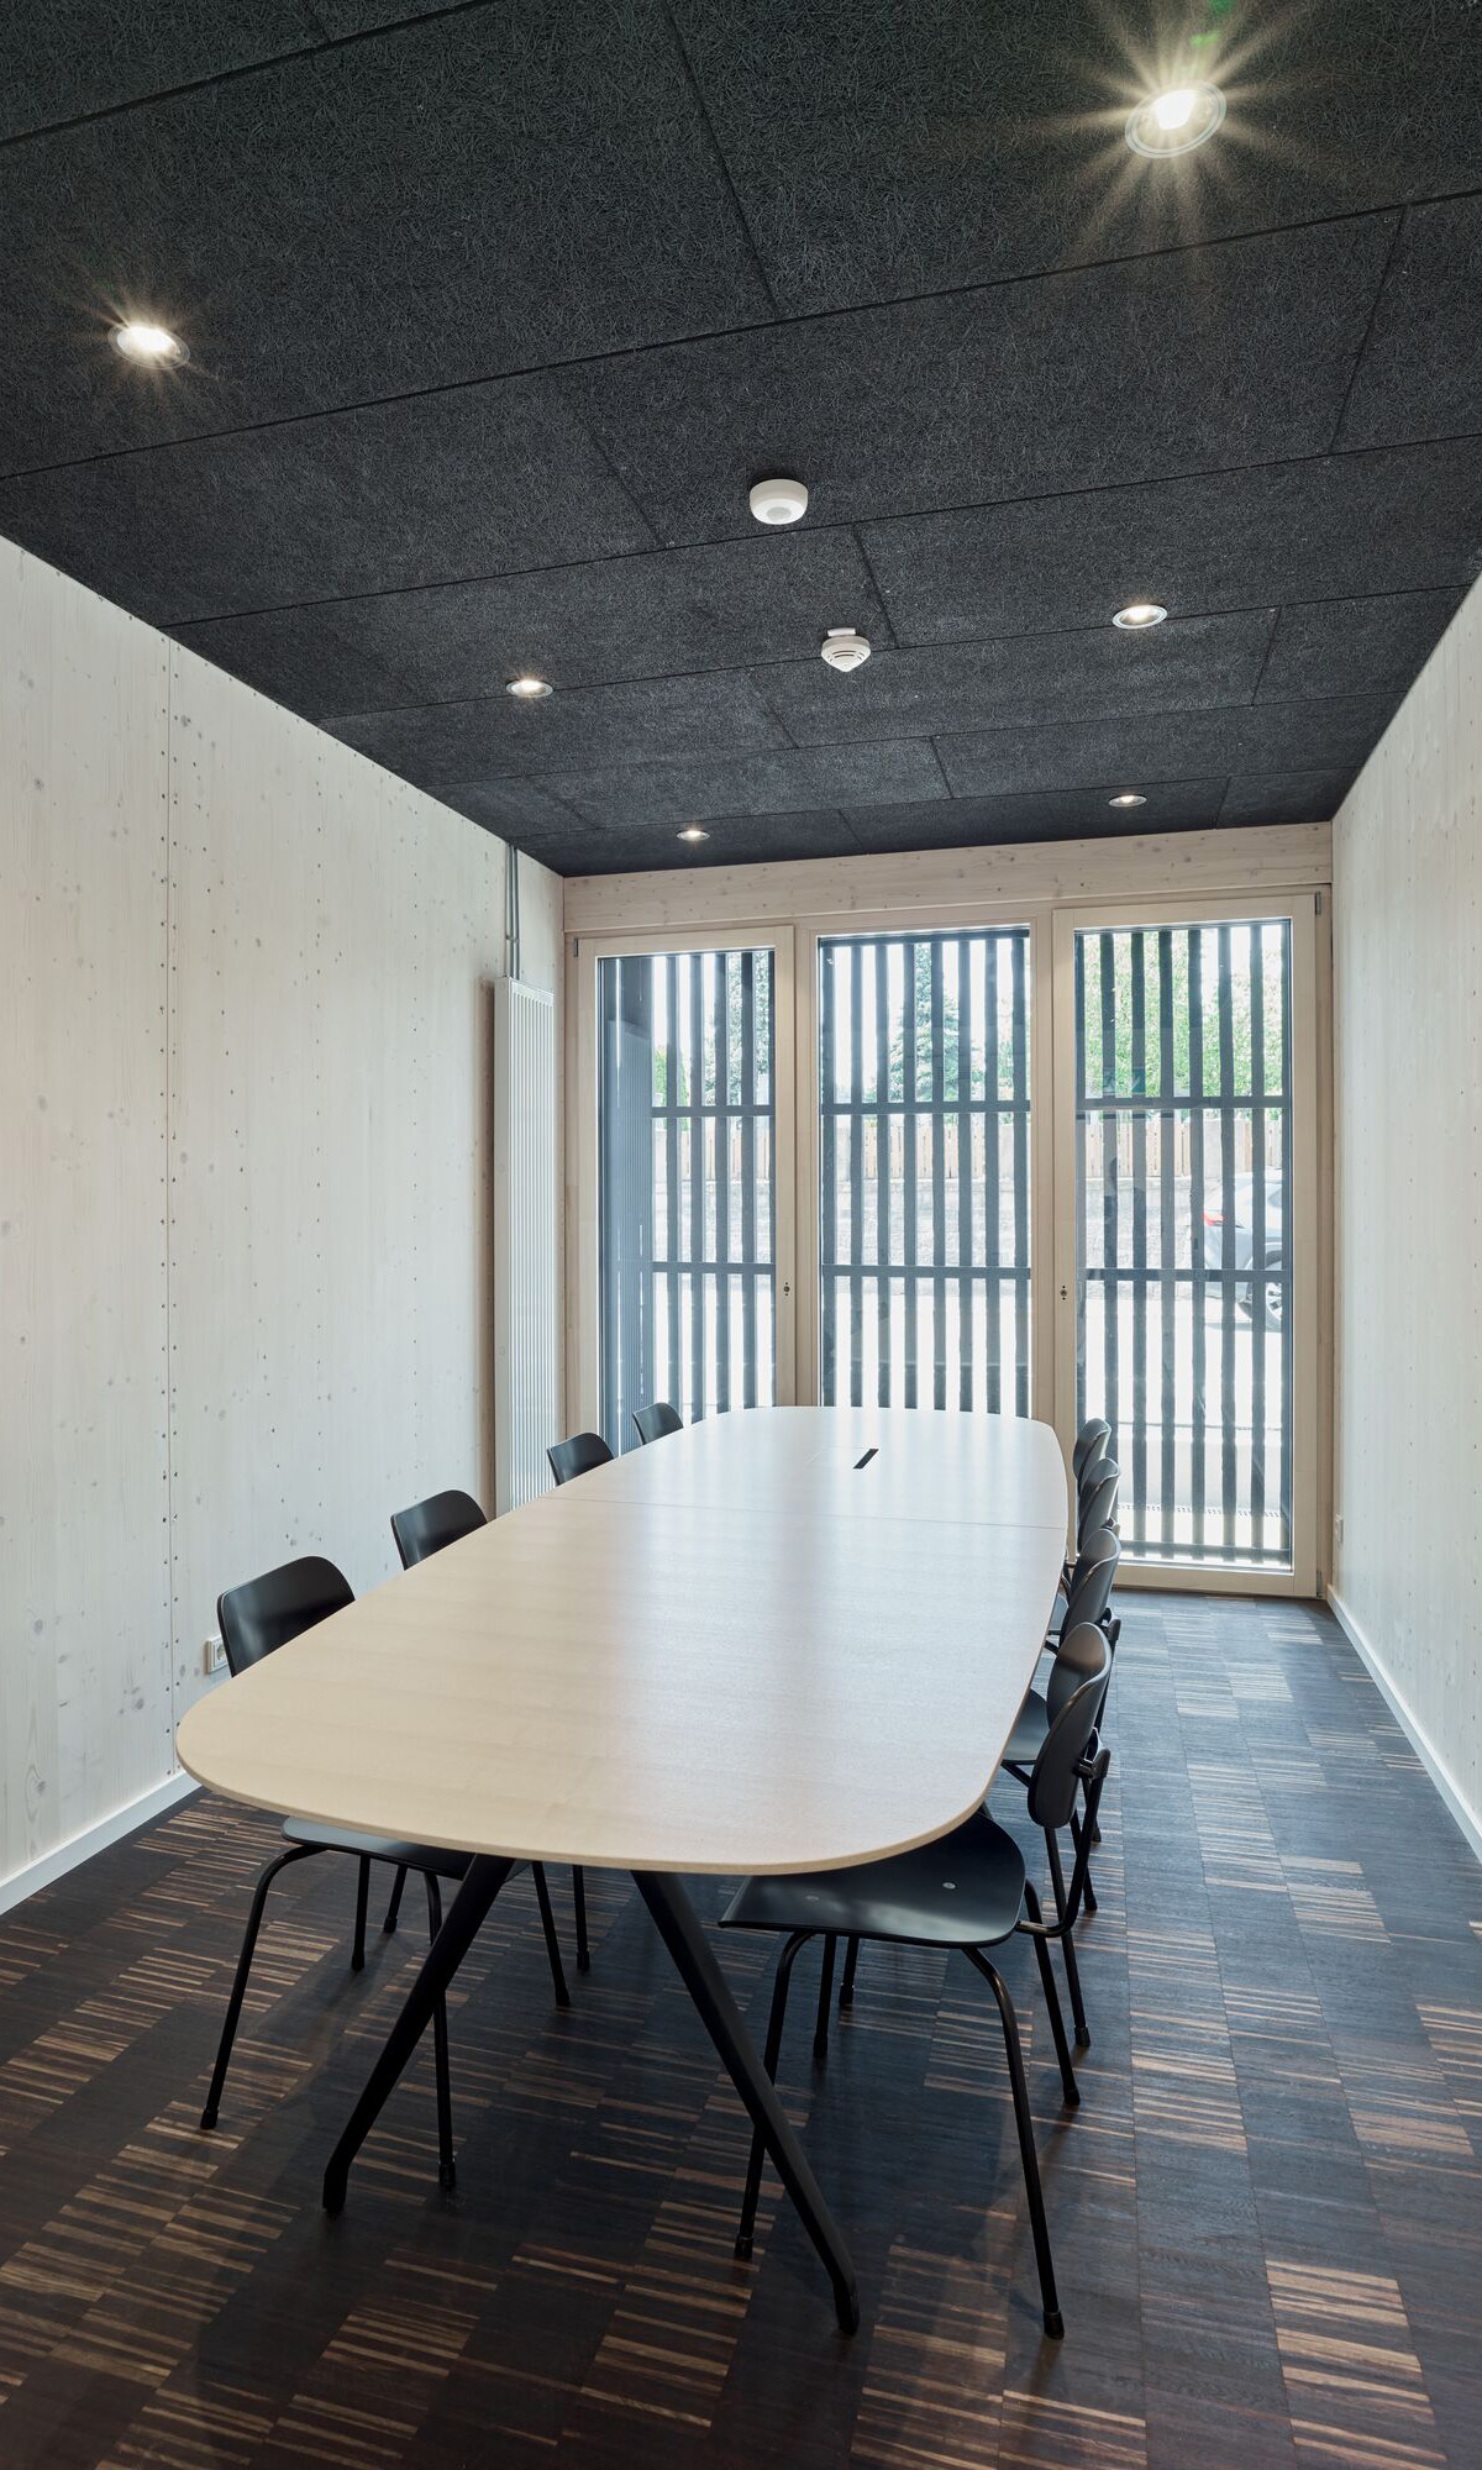 View of a meeting room in the multi-purpose building Dudelange in portrait format